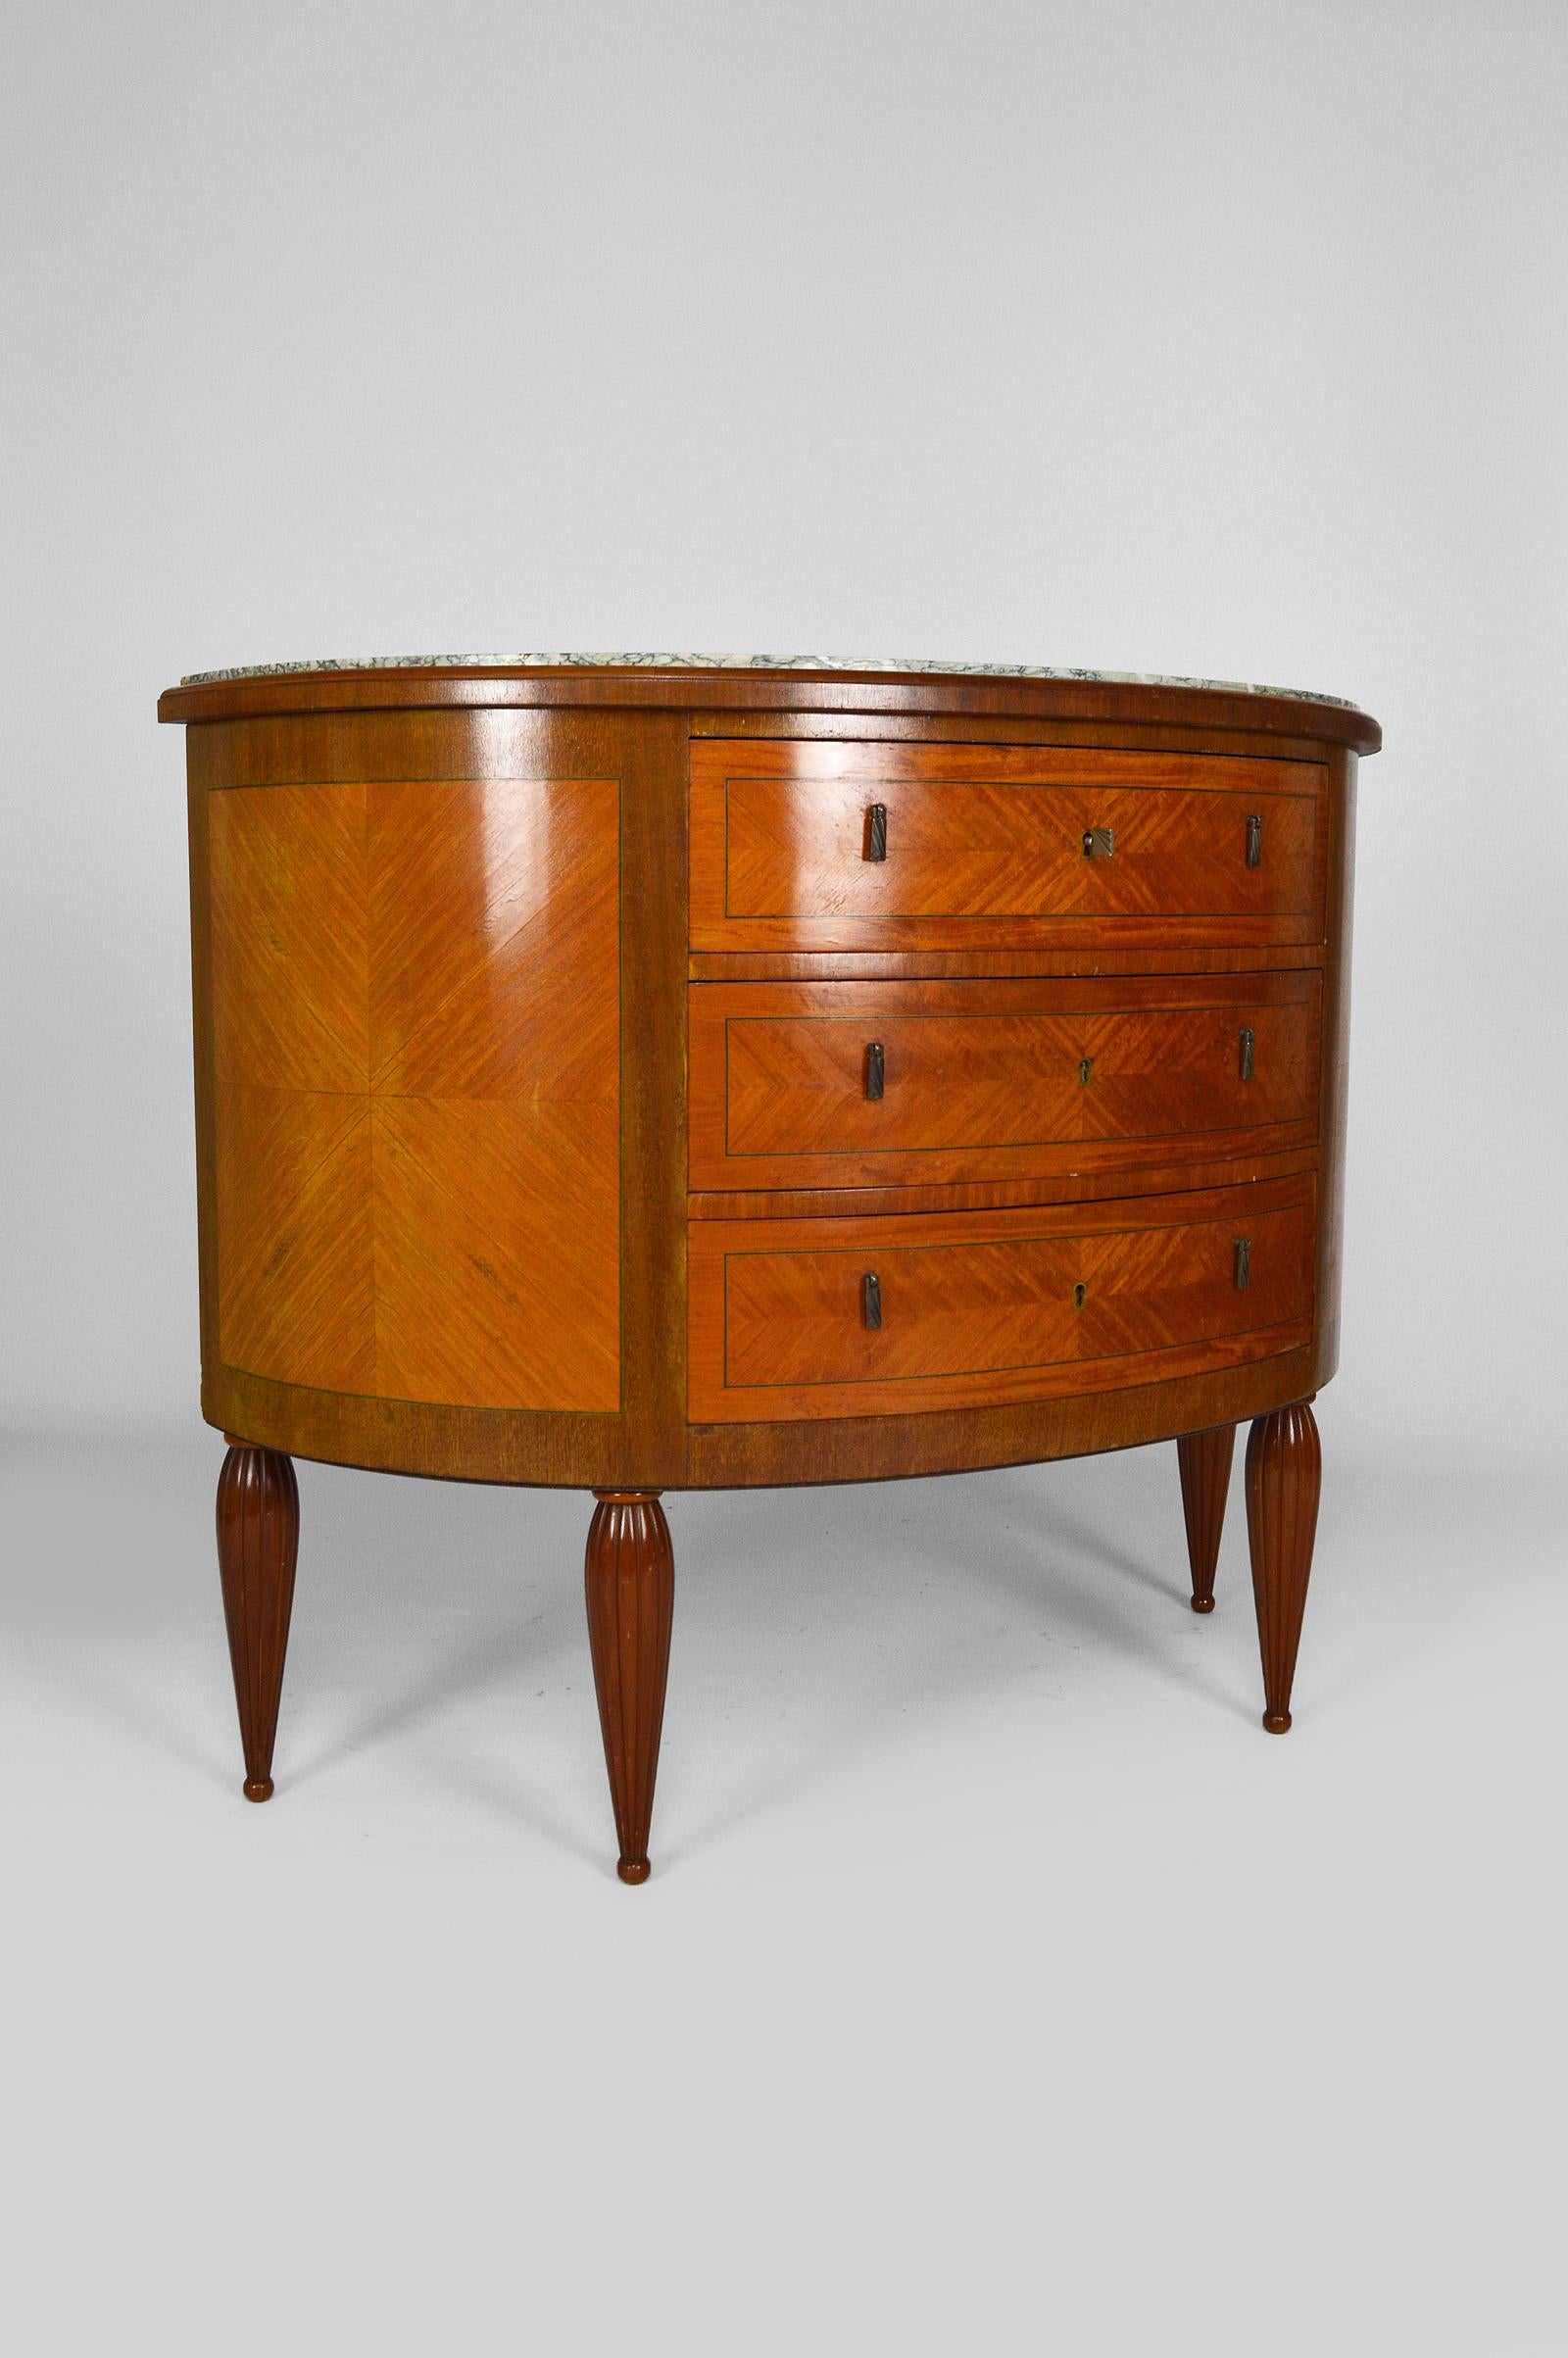 French Art Deco Demilune Mahogany & Marble-Top Commode / Chest of Drawers, circa 1925 For Sale